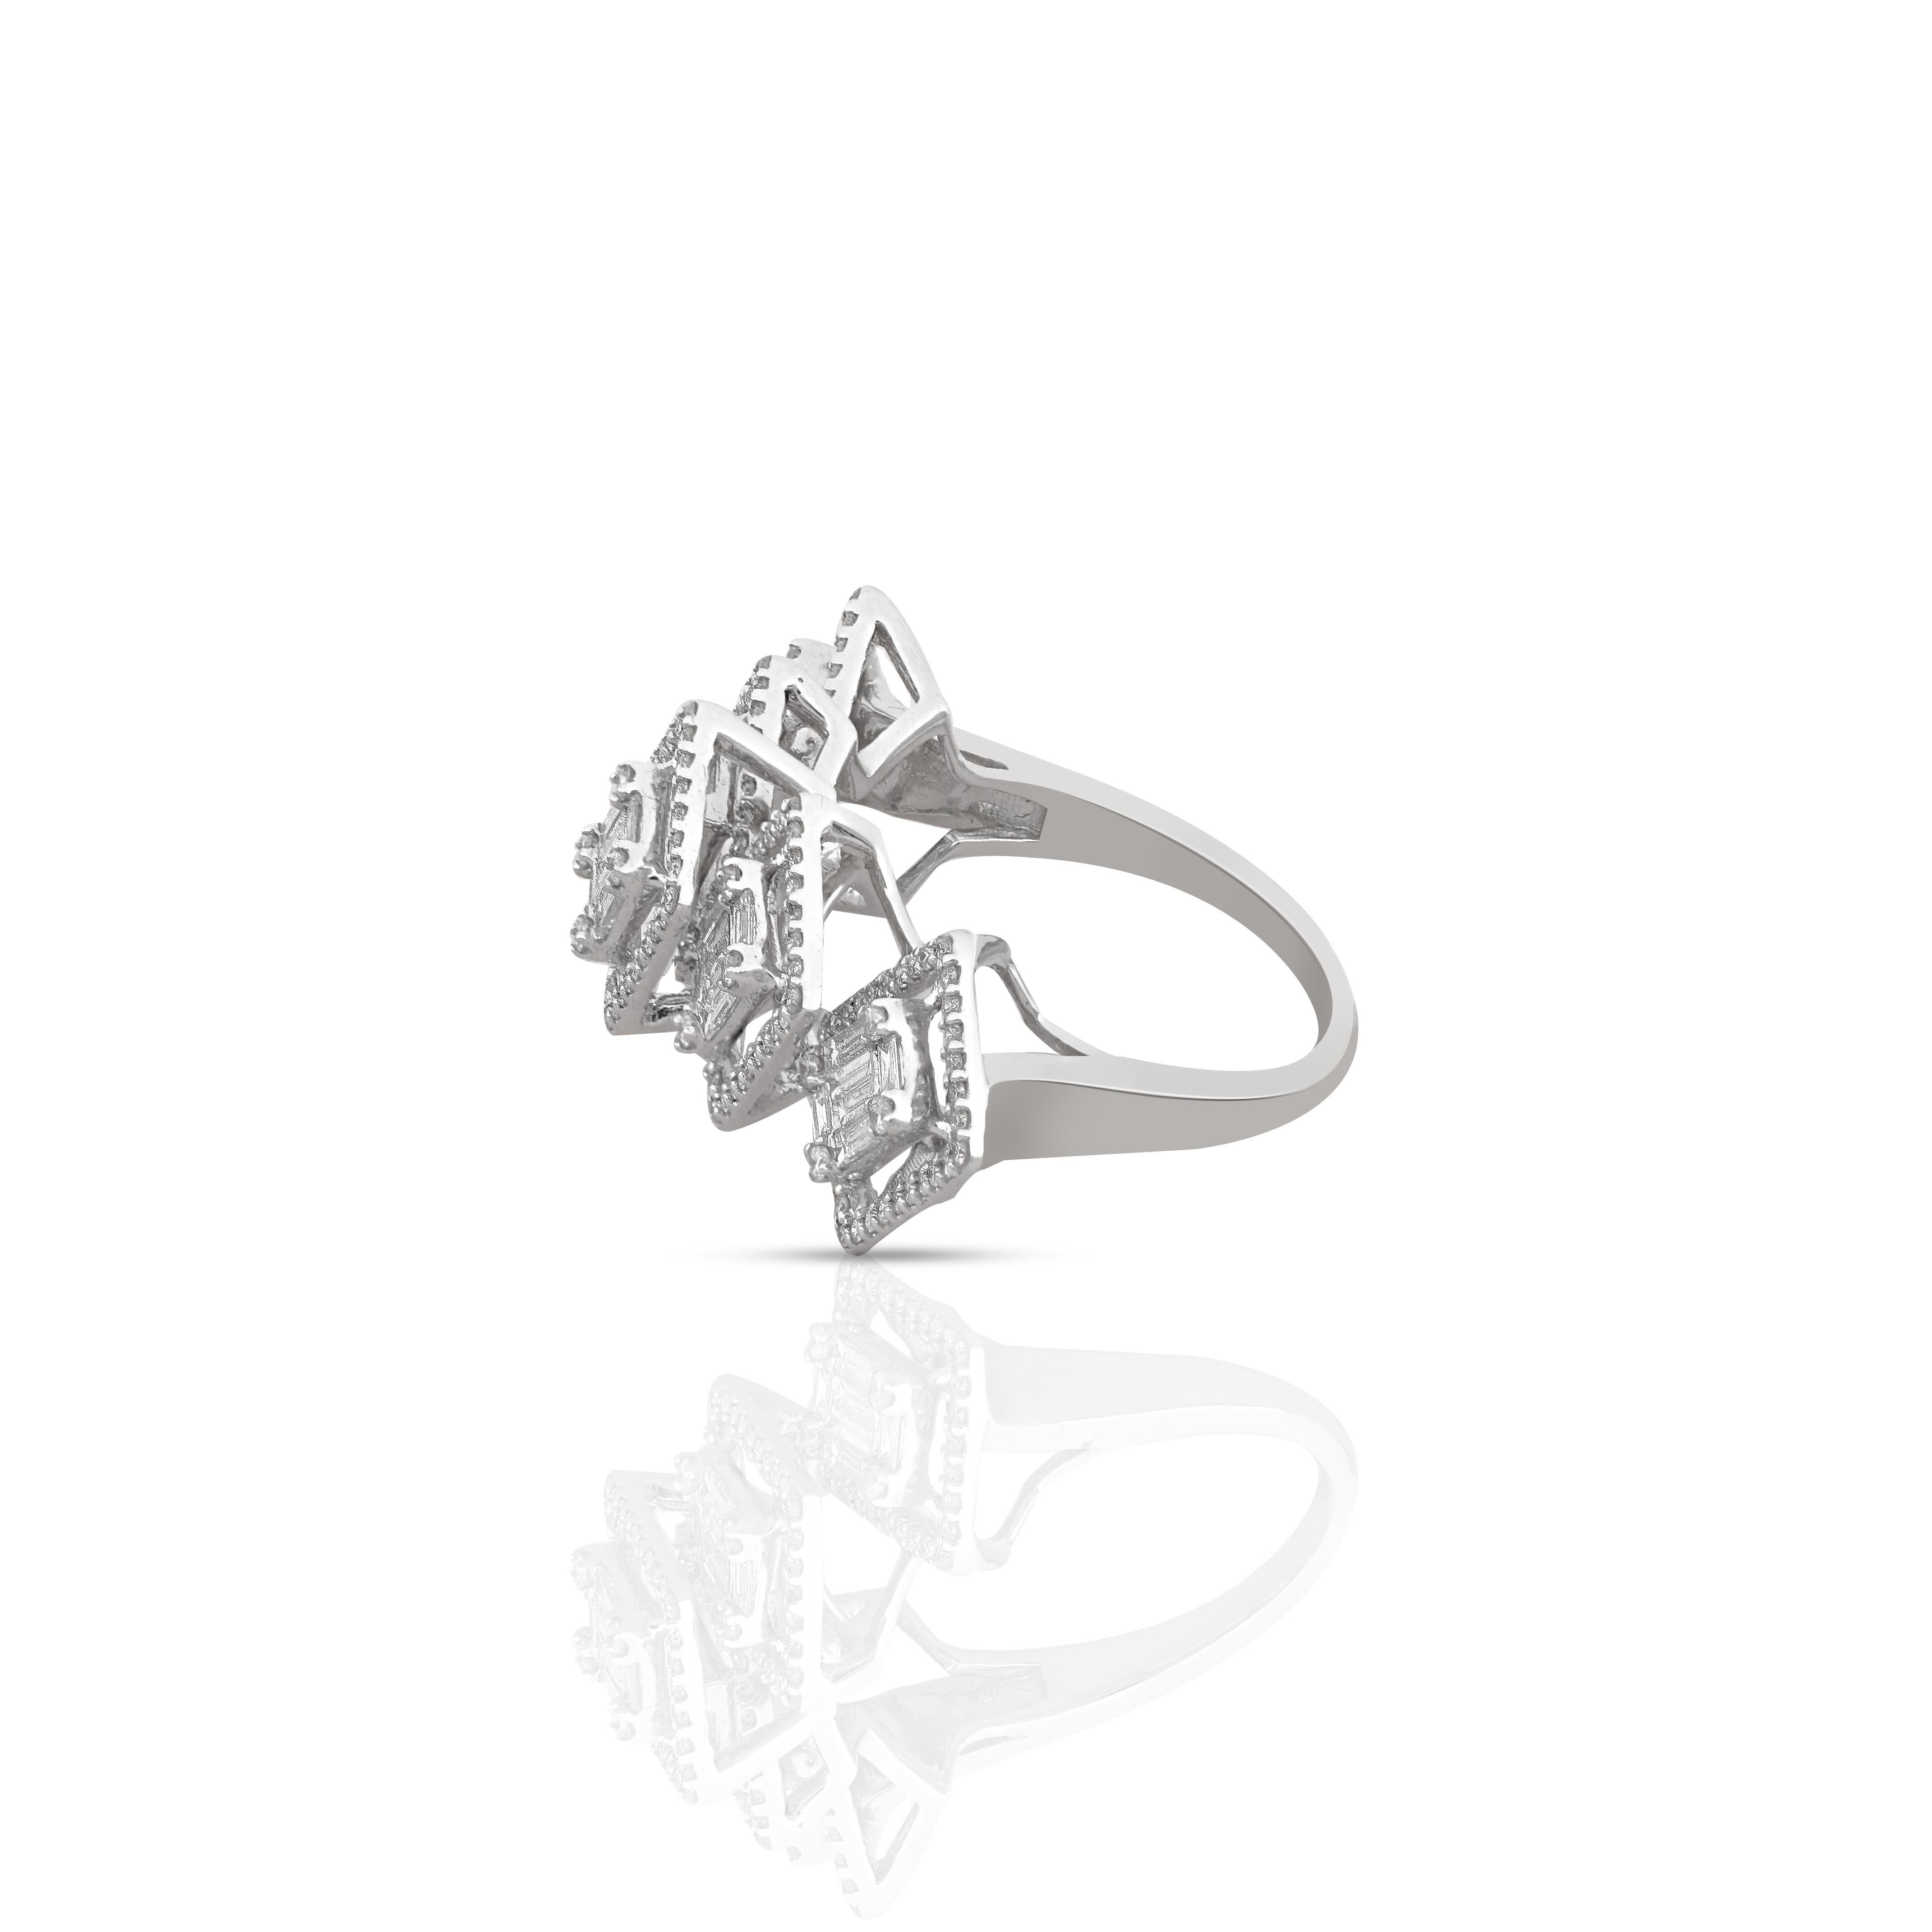 Amwaj 18 karat white gold and diamond ring features a charming quintet of baguette diamonds. Each of the 2 side stones is gently angled to embrace the finger and catch and reflect the light. Subtly surrounded by small round diamonds, the setting of